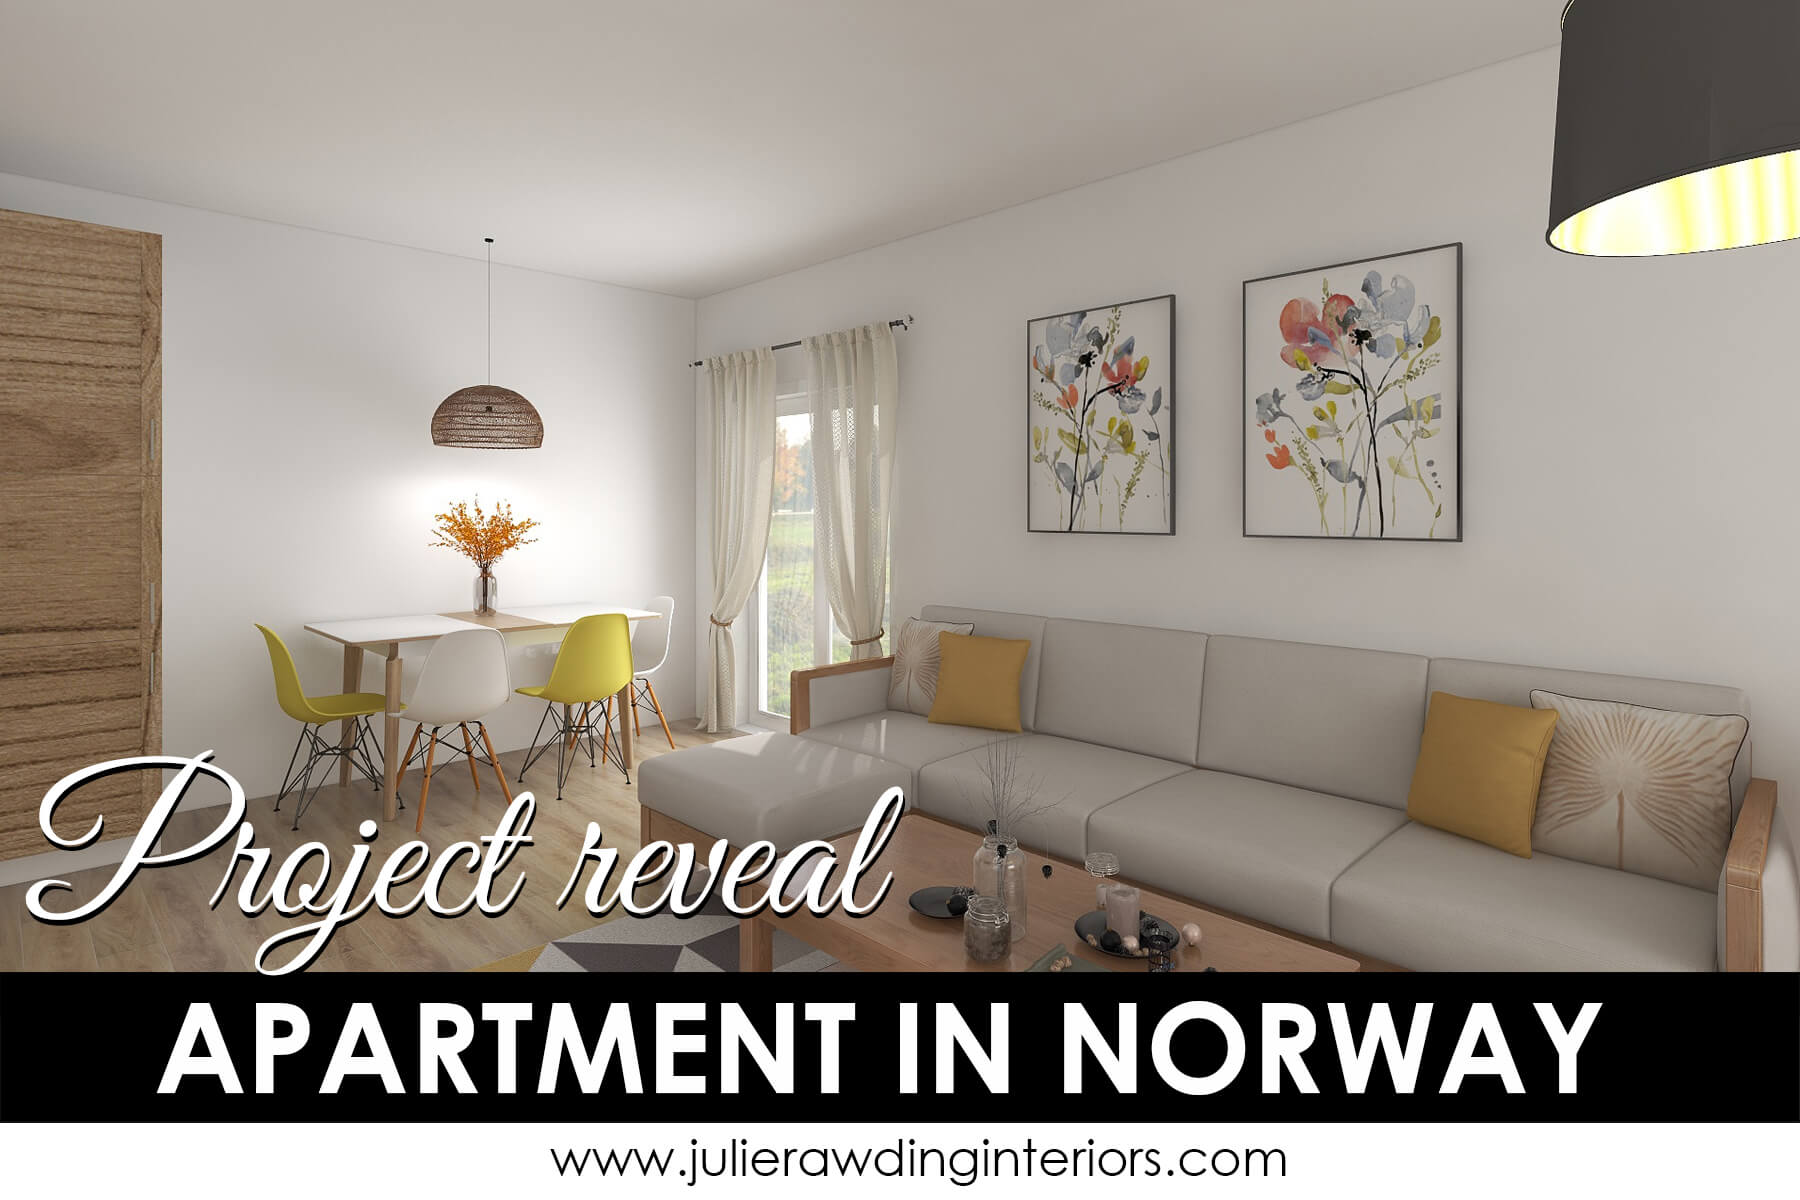 Project reveal: Apartment in Norway